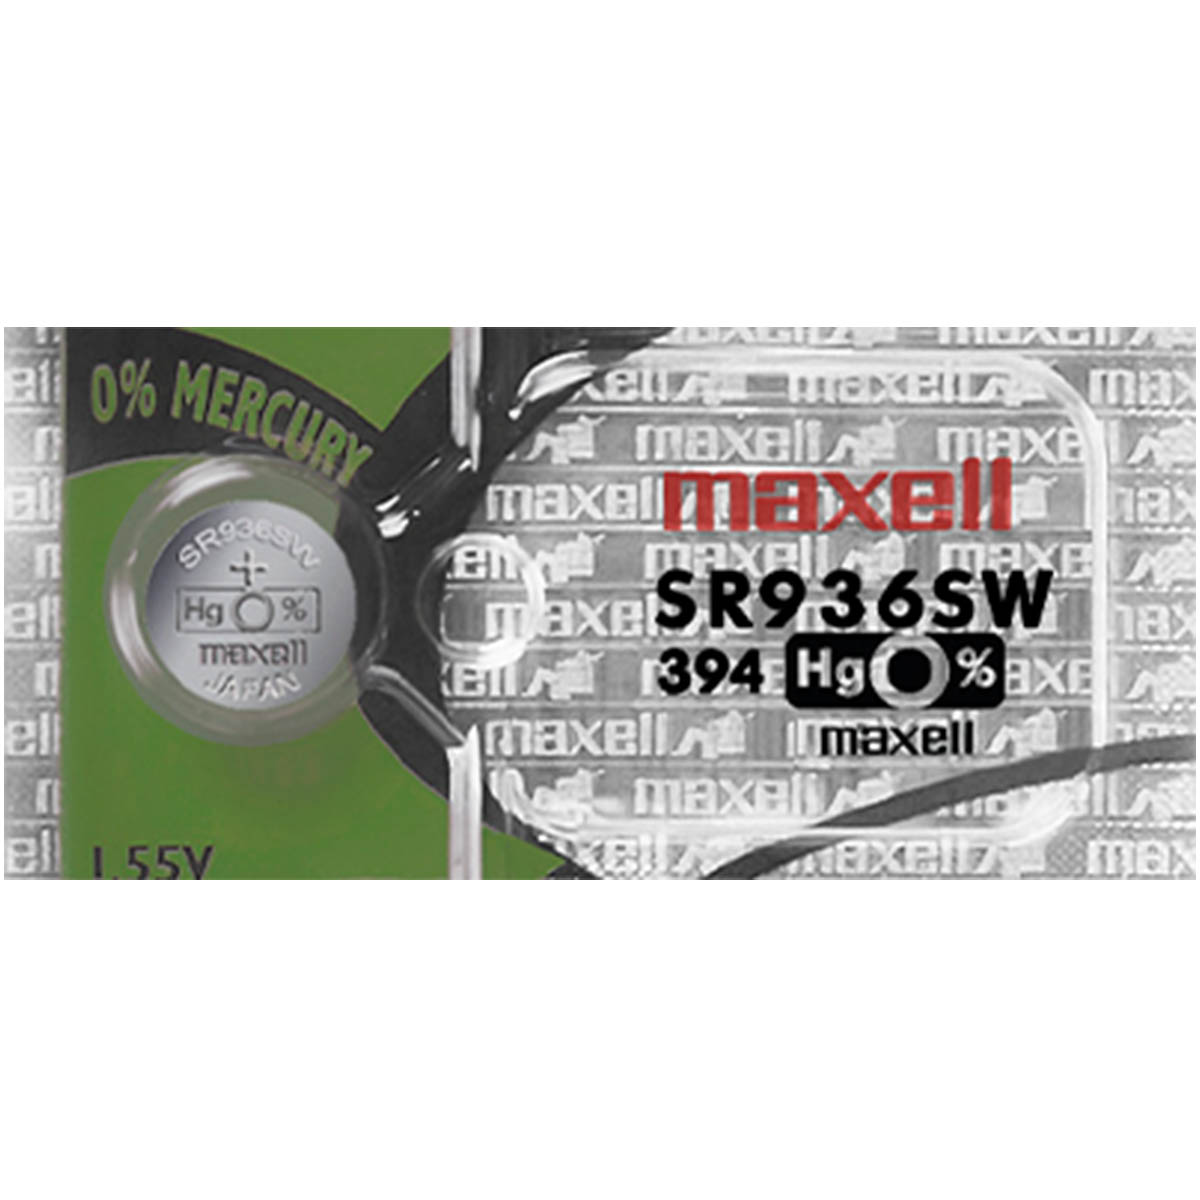 Maxell 394 Watch Battery (SR936SW) Silver Oxide 1.55V